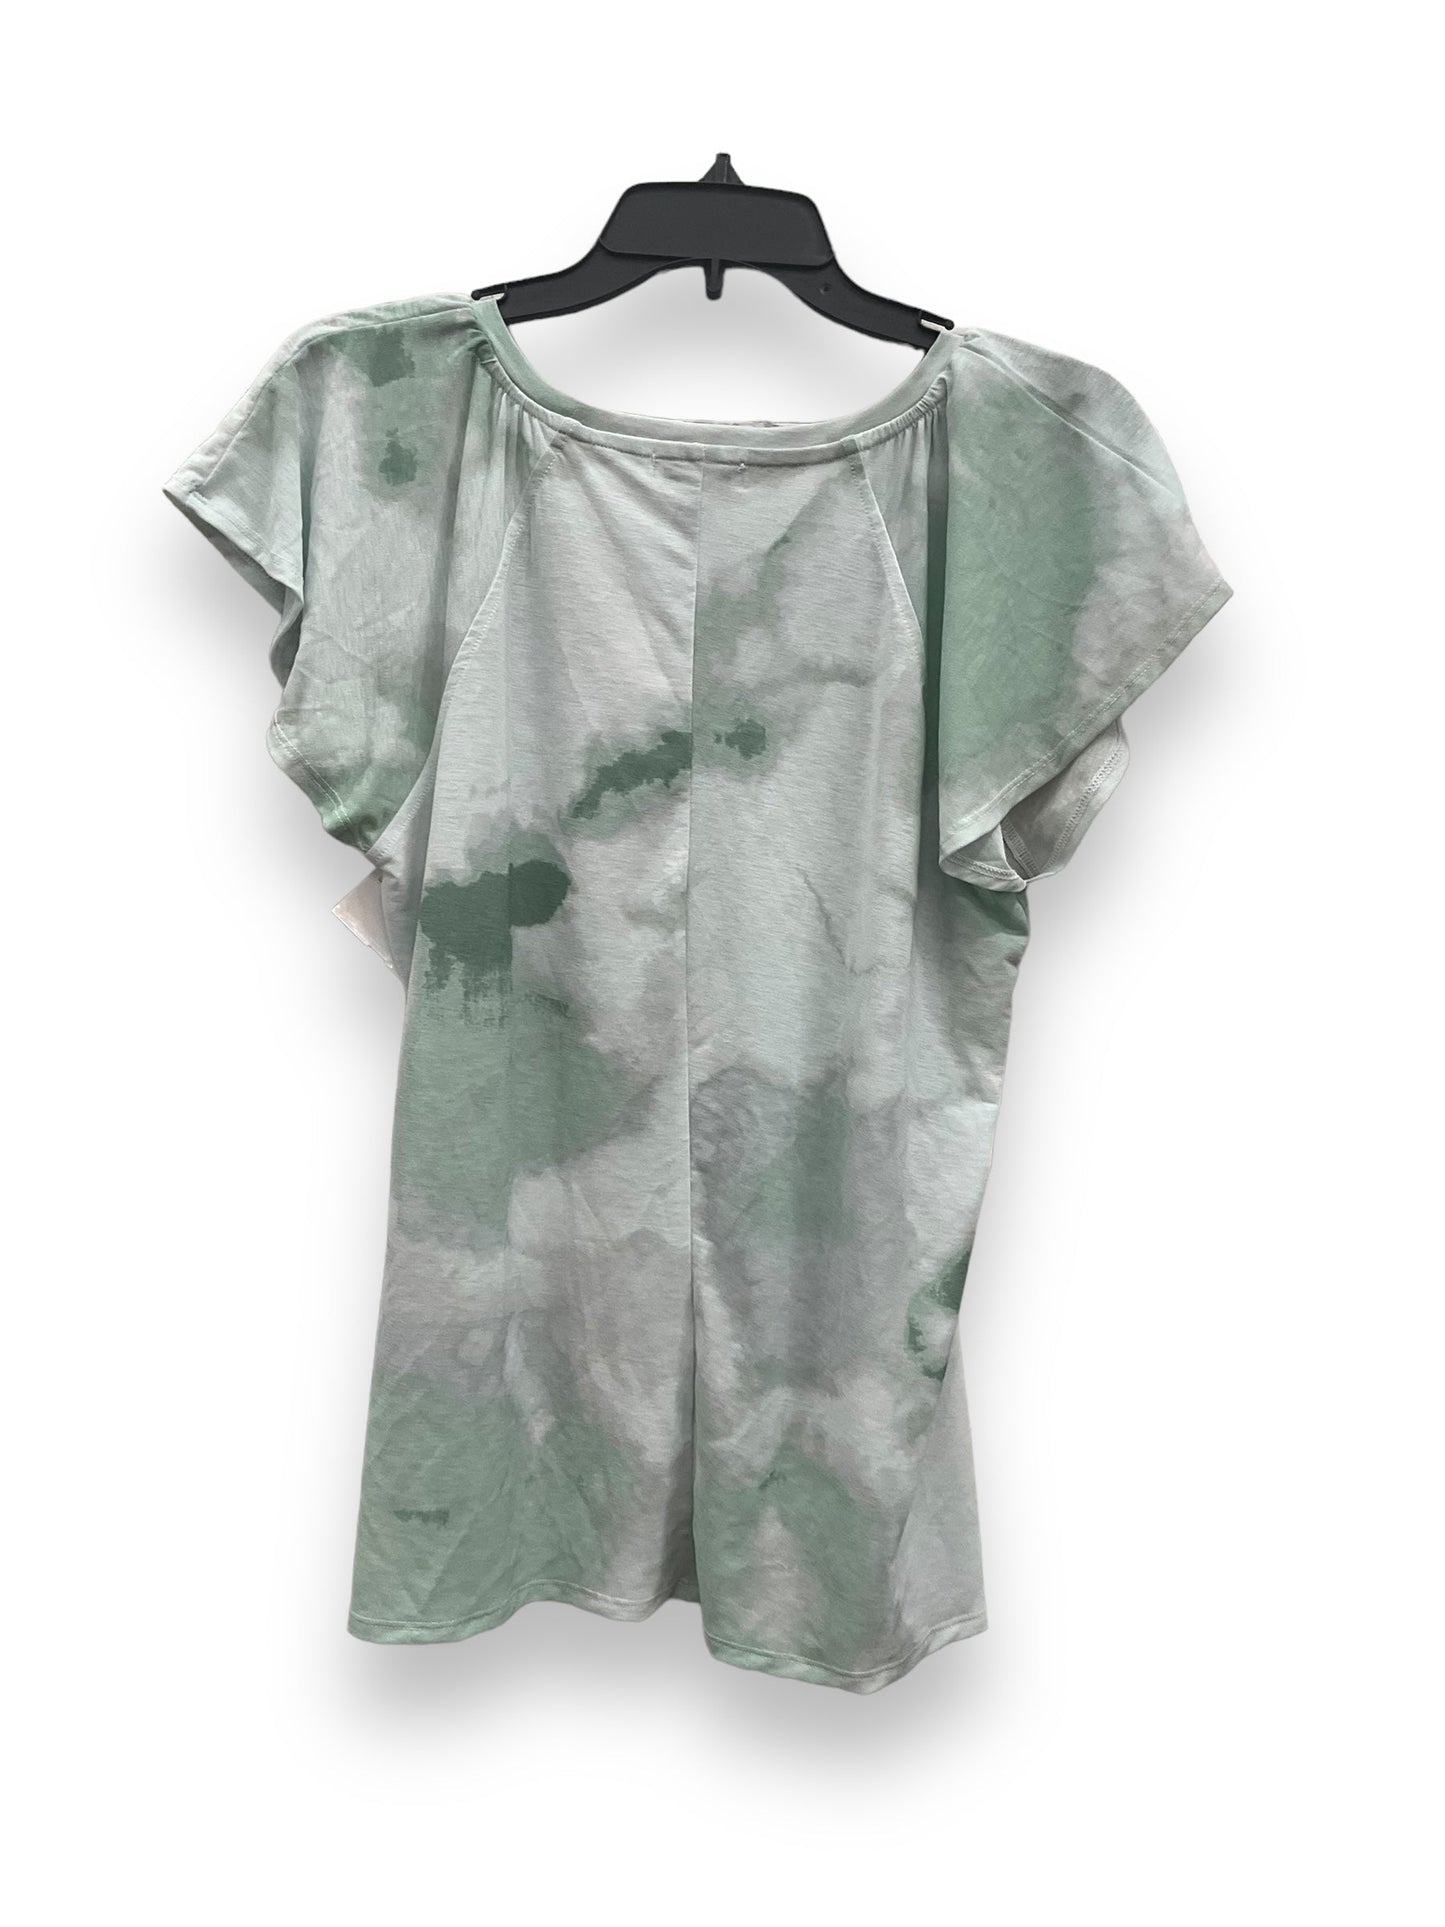 Green Top ss Nine West, Size L